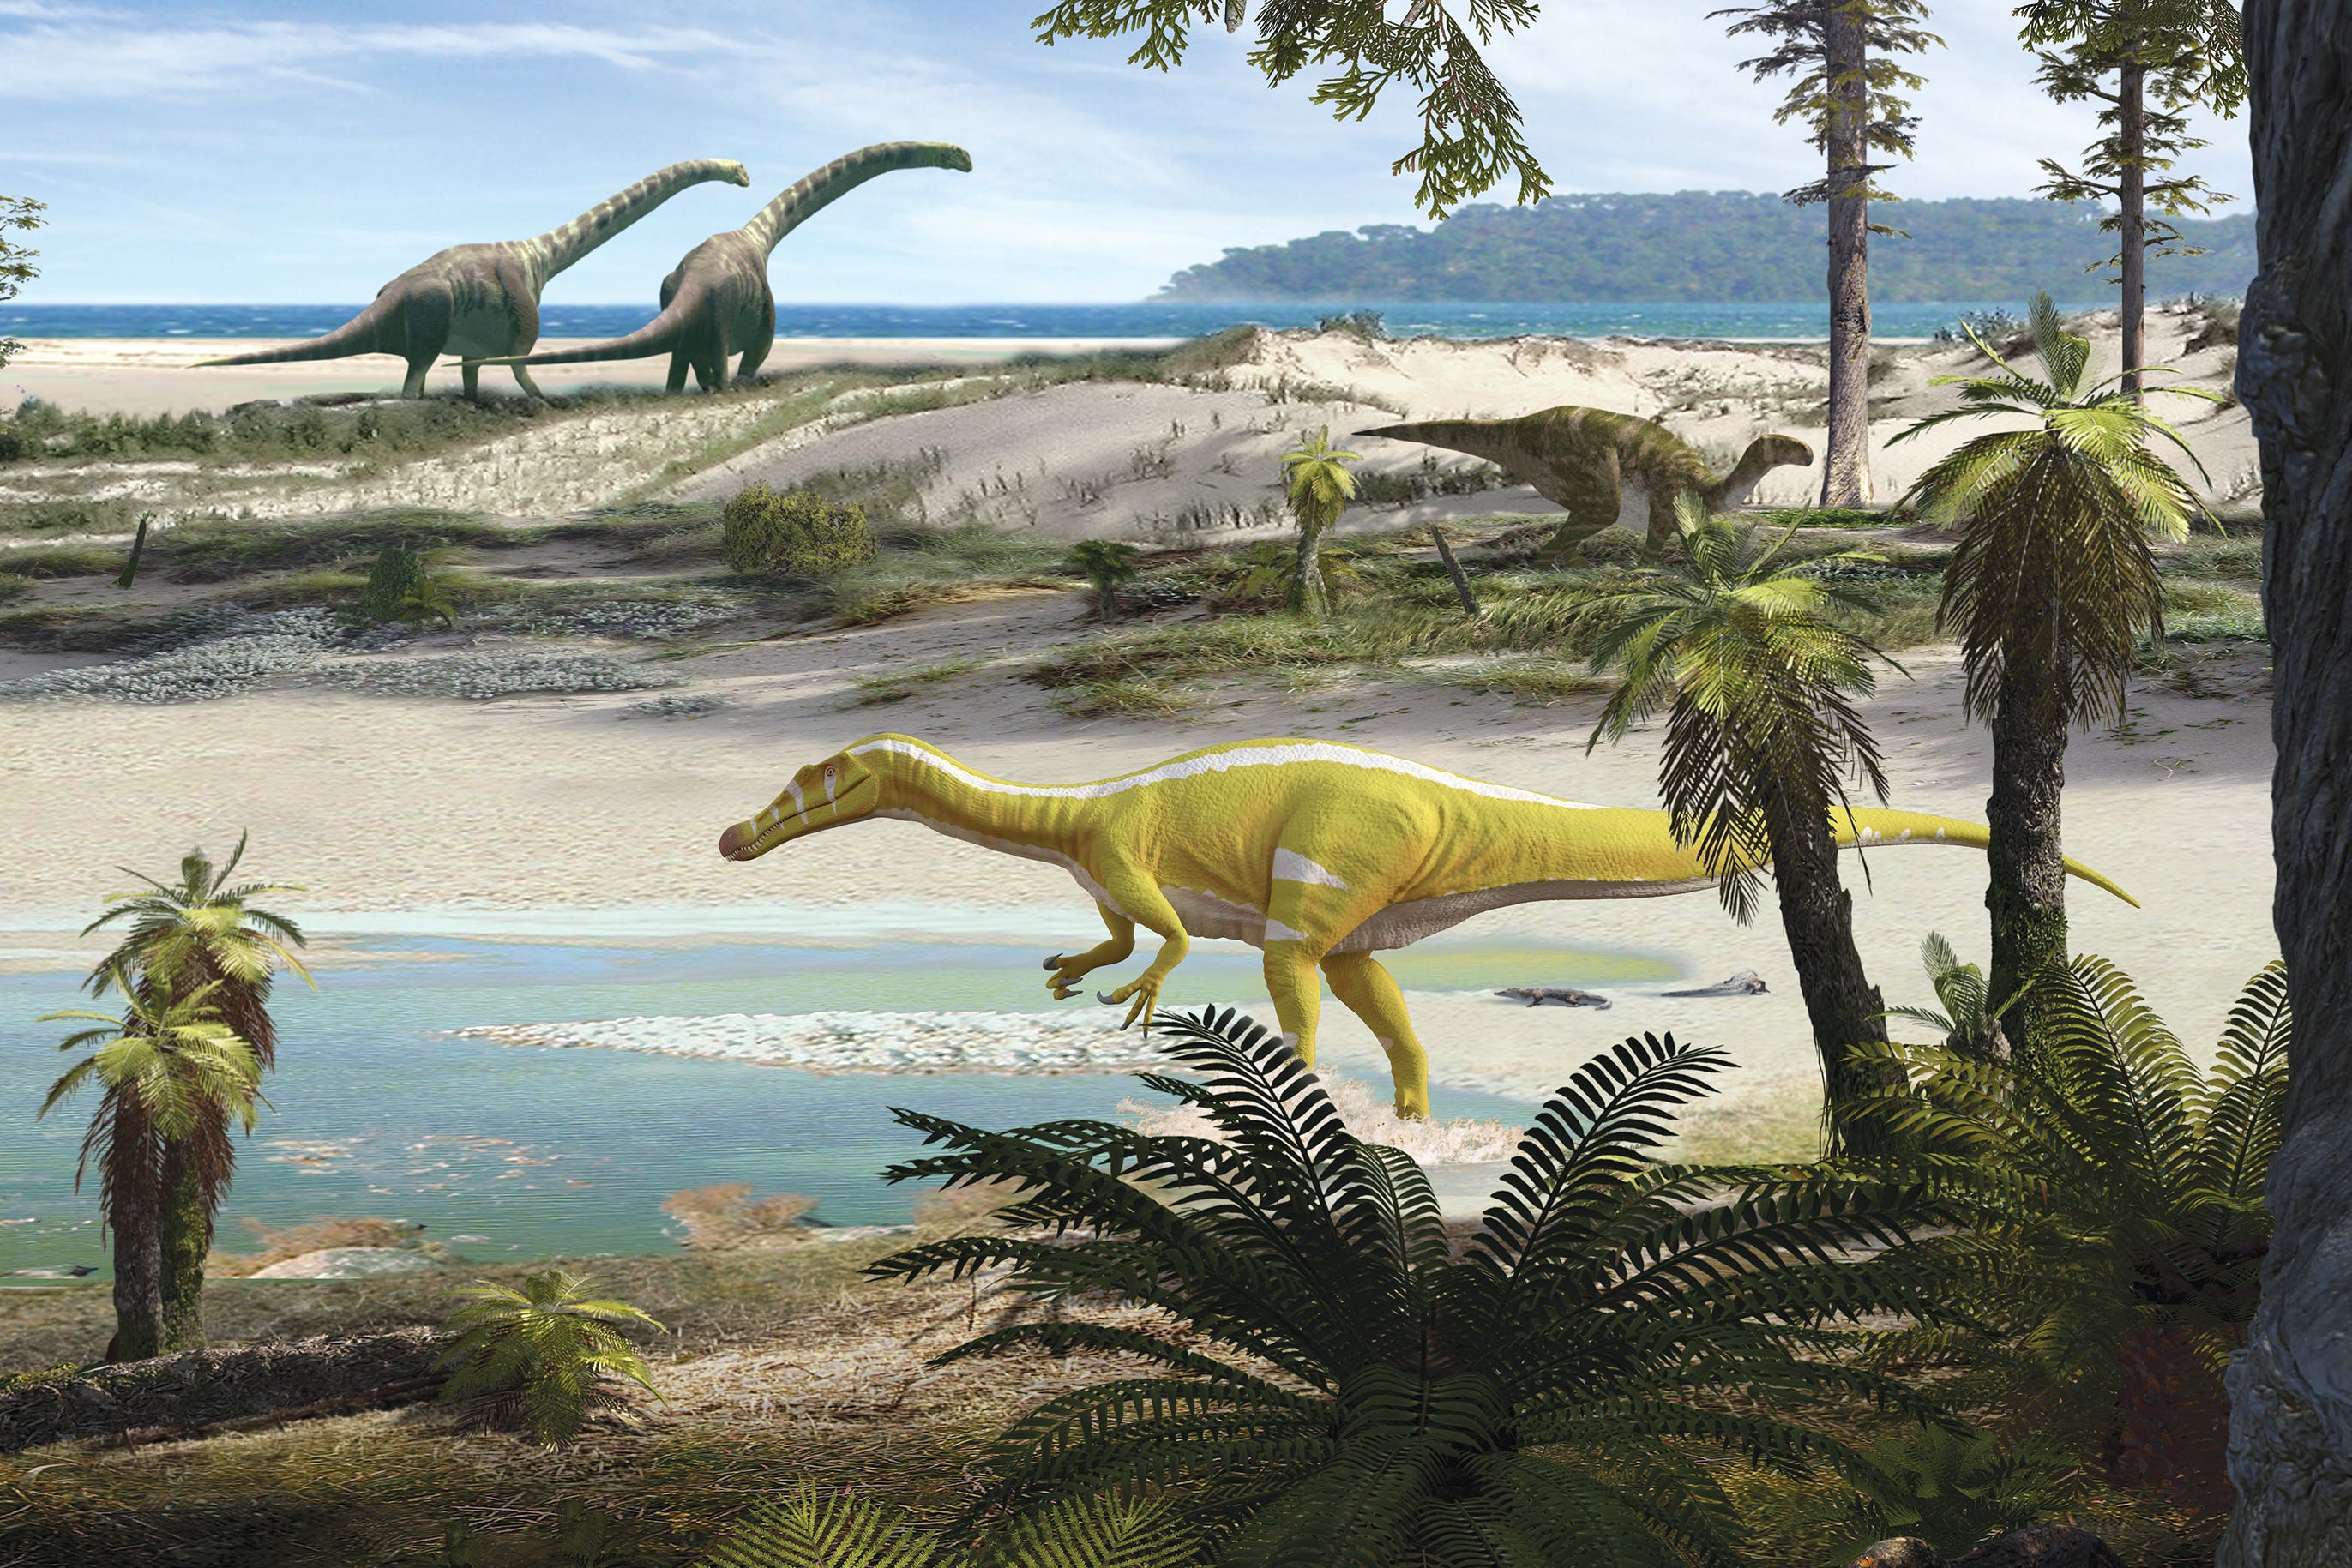 Fossil fragments shed light on a new dinosaur species in Spain